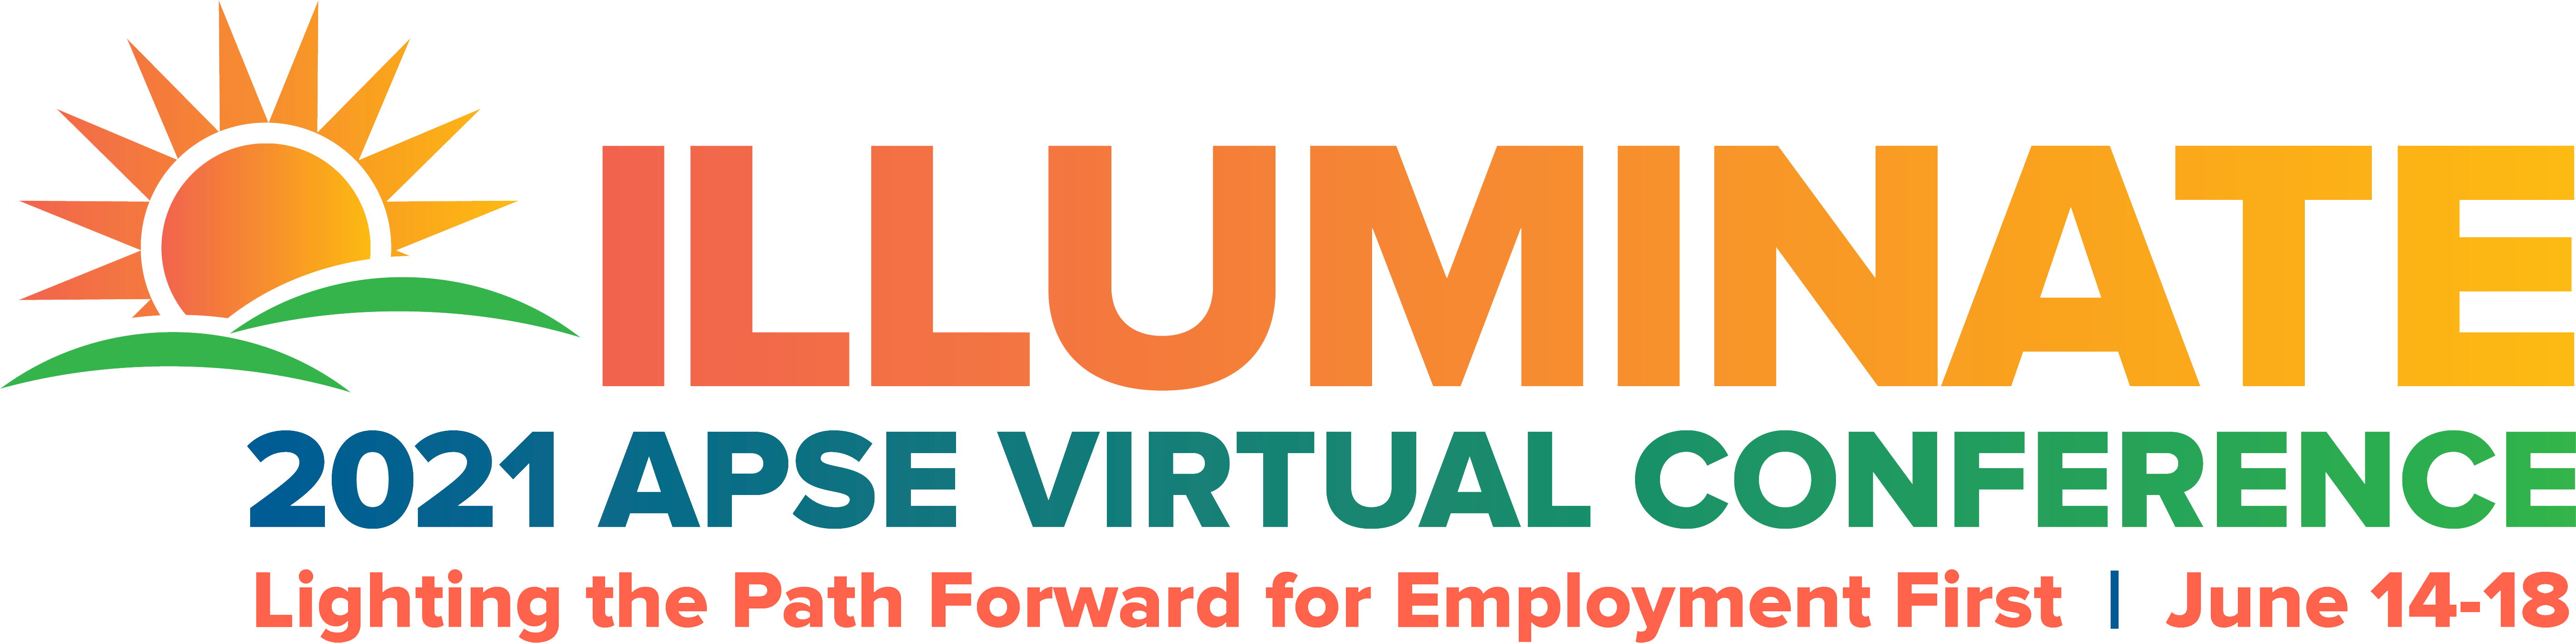 Sun over green hills art. Text: "ILLUMINATE" in an orange gradient. Text: "2021 APSE Virtual Conference: Lighting the Path Forward for Employment First."